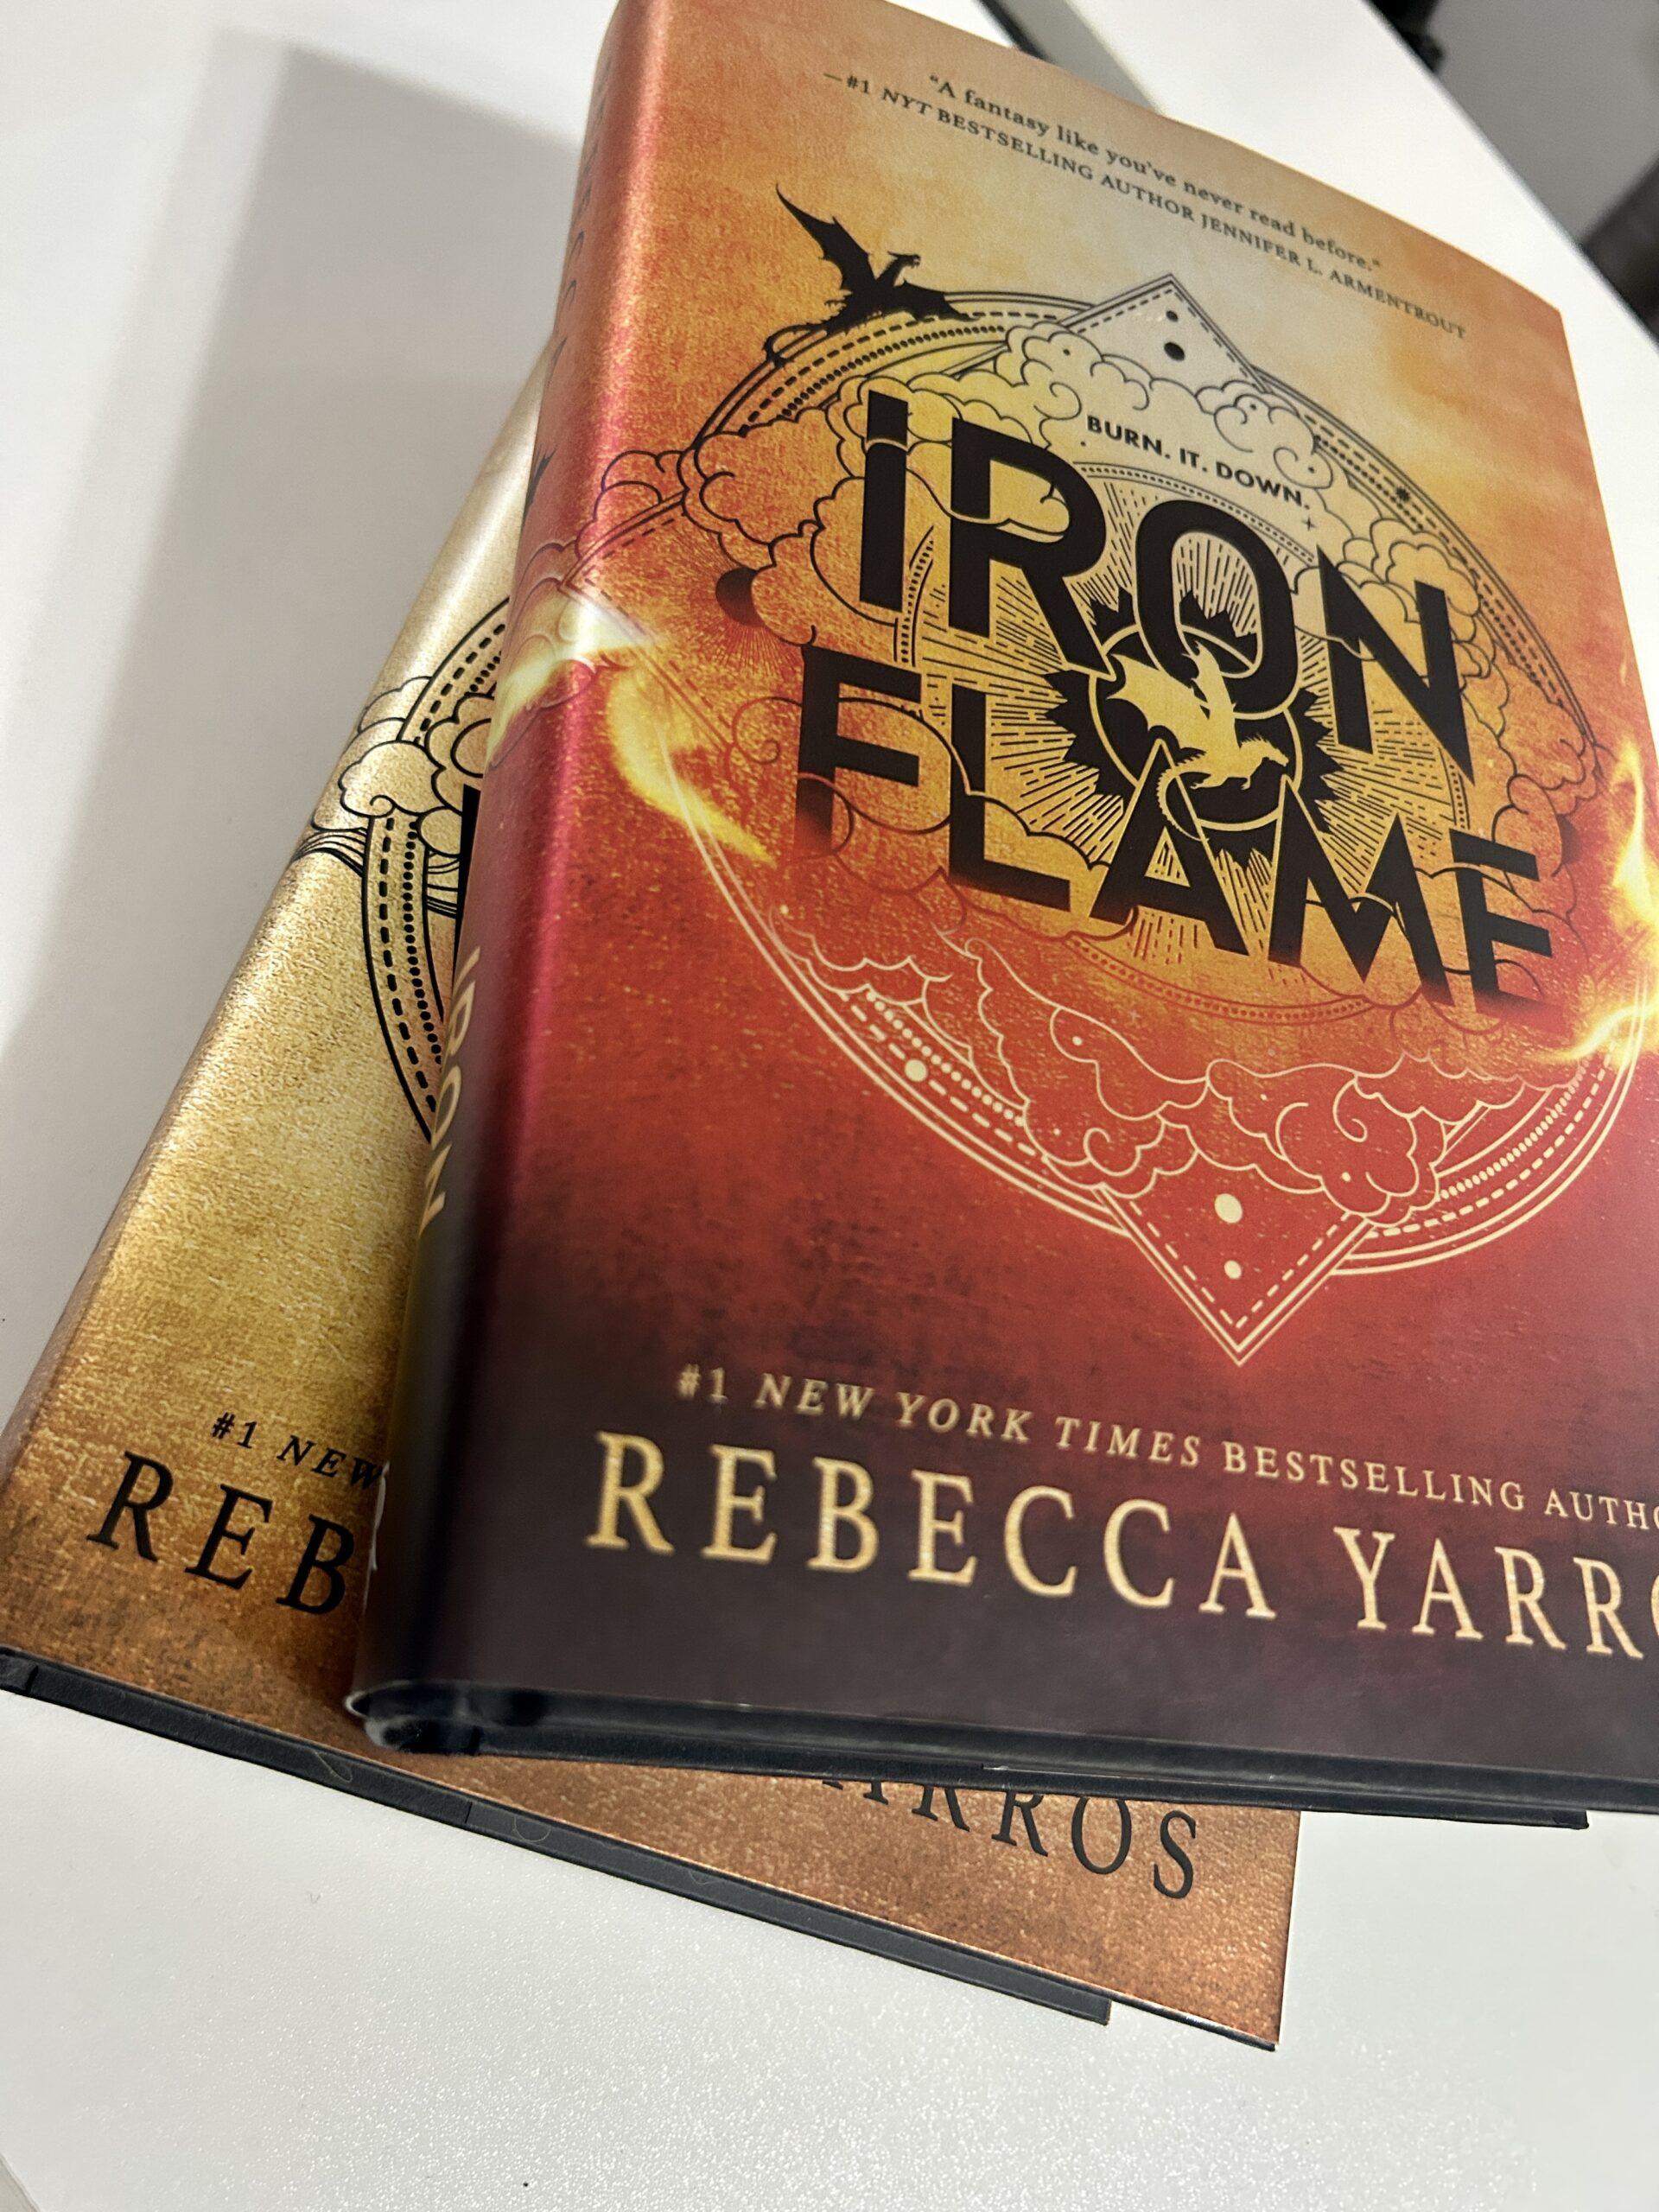 Review: Romantic fantasy novel 'Iron Flame' brought me to